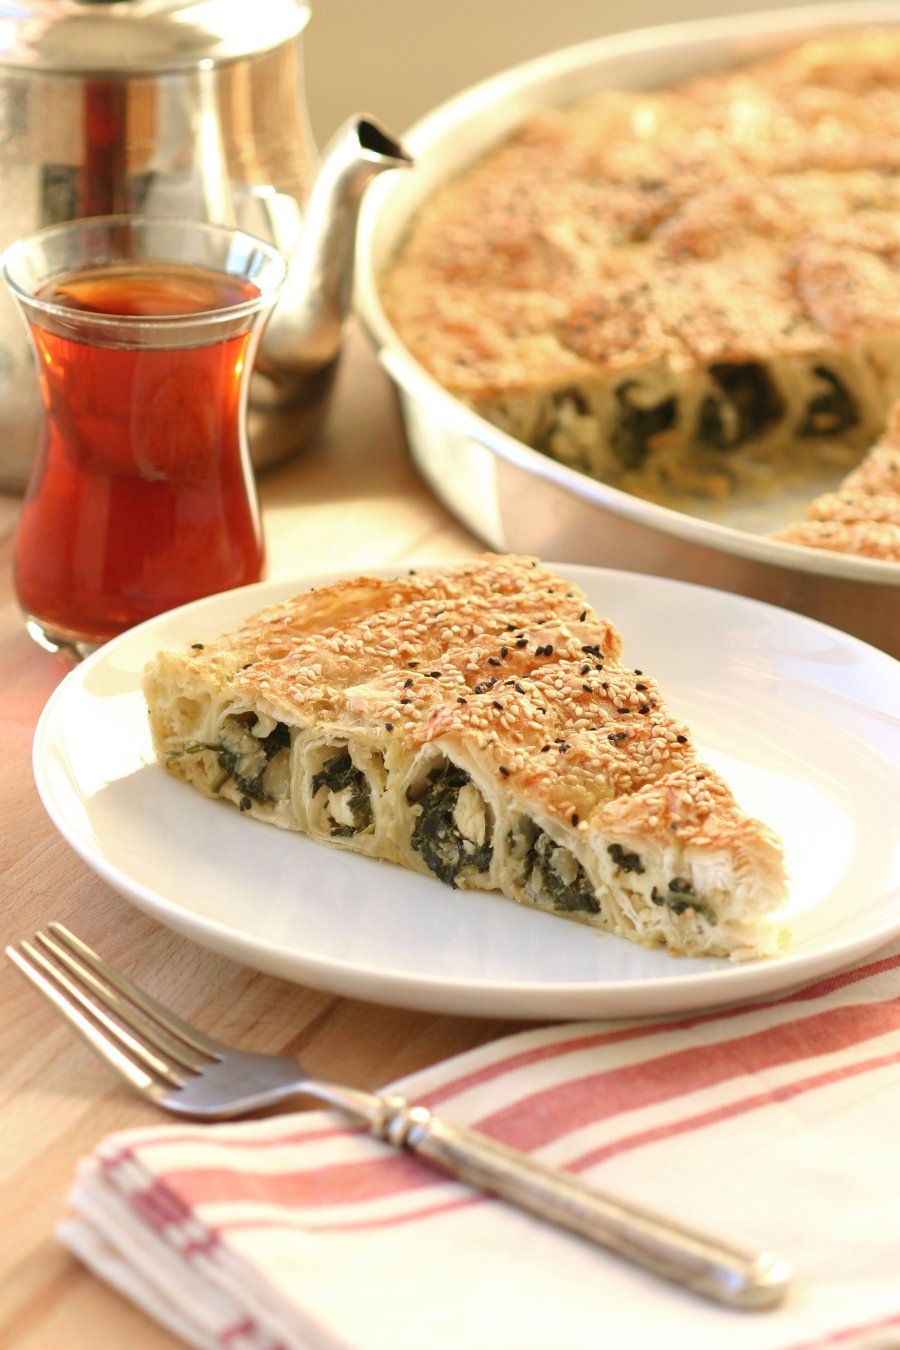 An egg- and dairy-free version of a Turkish cuisine favorite, this Vegan Spinach and Cheese Börek recipe is just as delicious as the original.